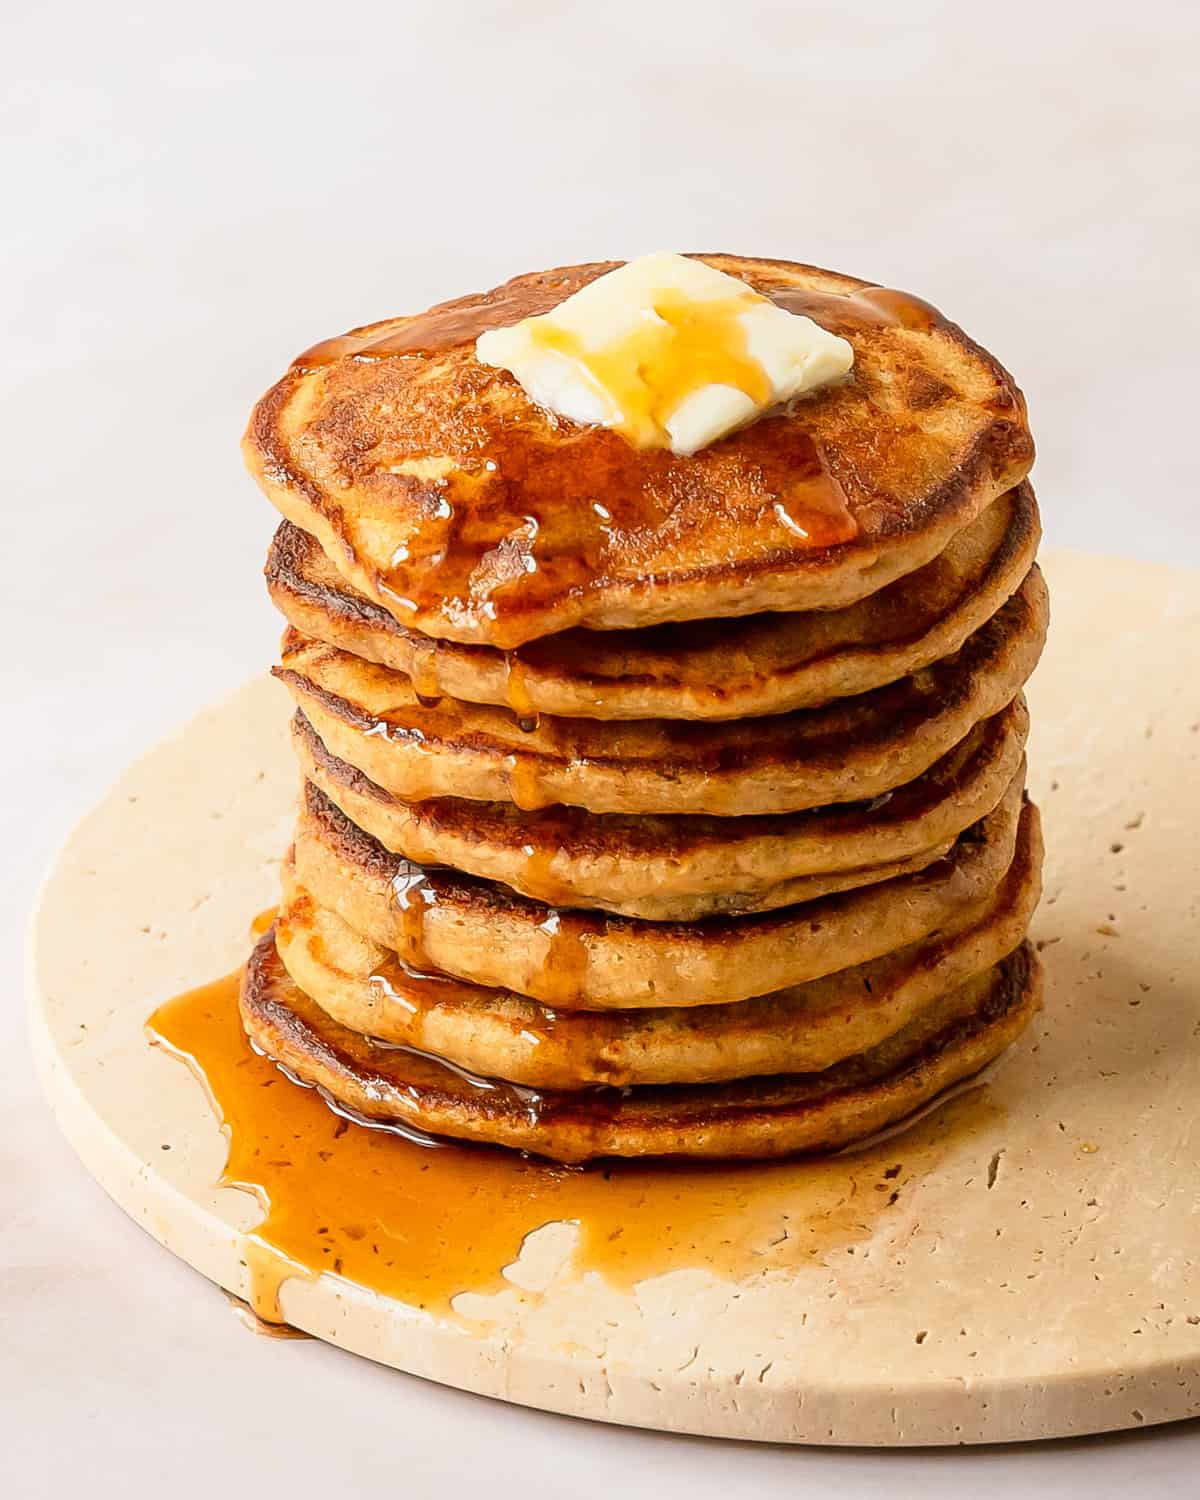 Oat flour pancakes are are so irresistibly light, fluffy and delicious, you’d never know they are also naturally gluten free. Learn how to make these quick and easy oatmeal flour pancakes using basic pantry ingredients. They make the perfect cozy breakfast everyone will love!